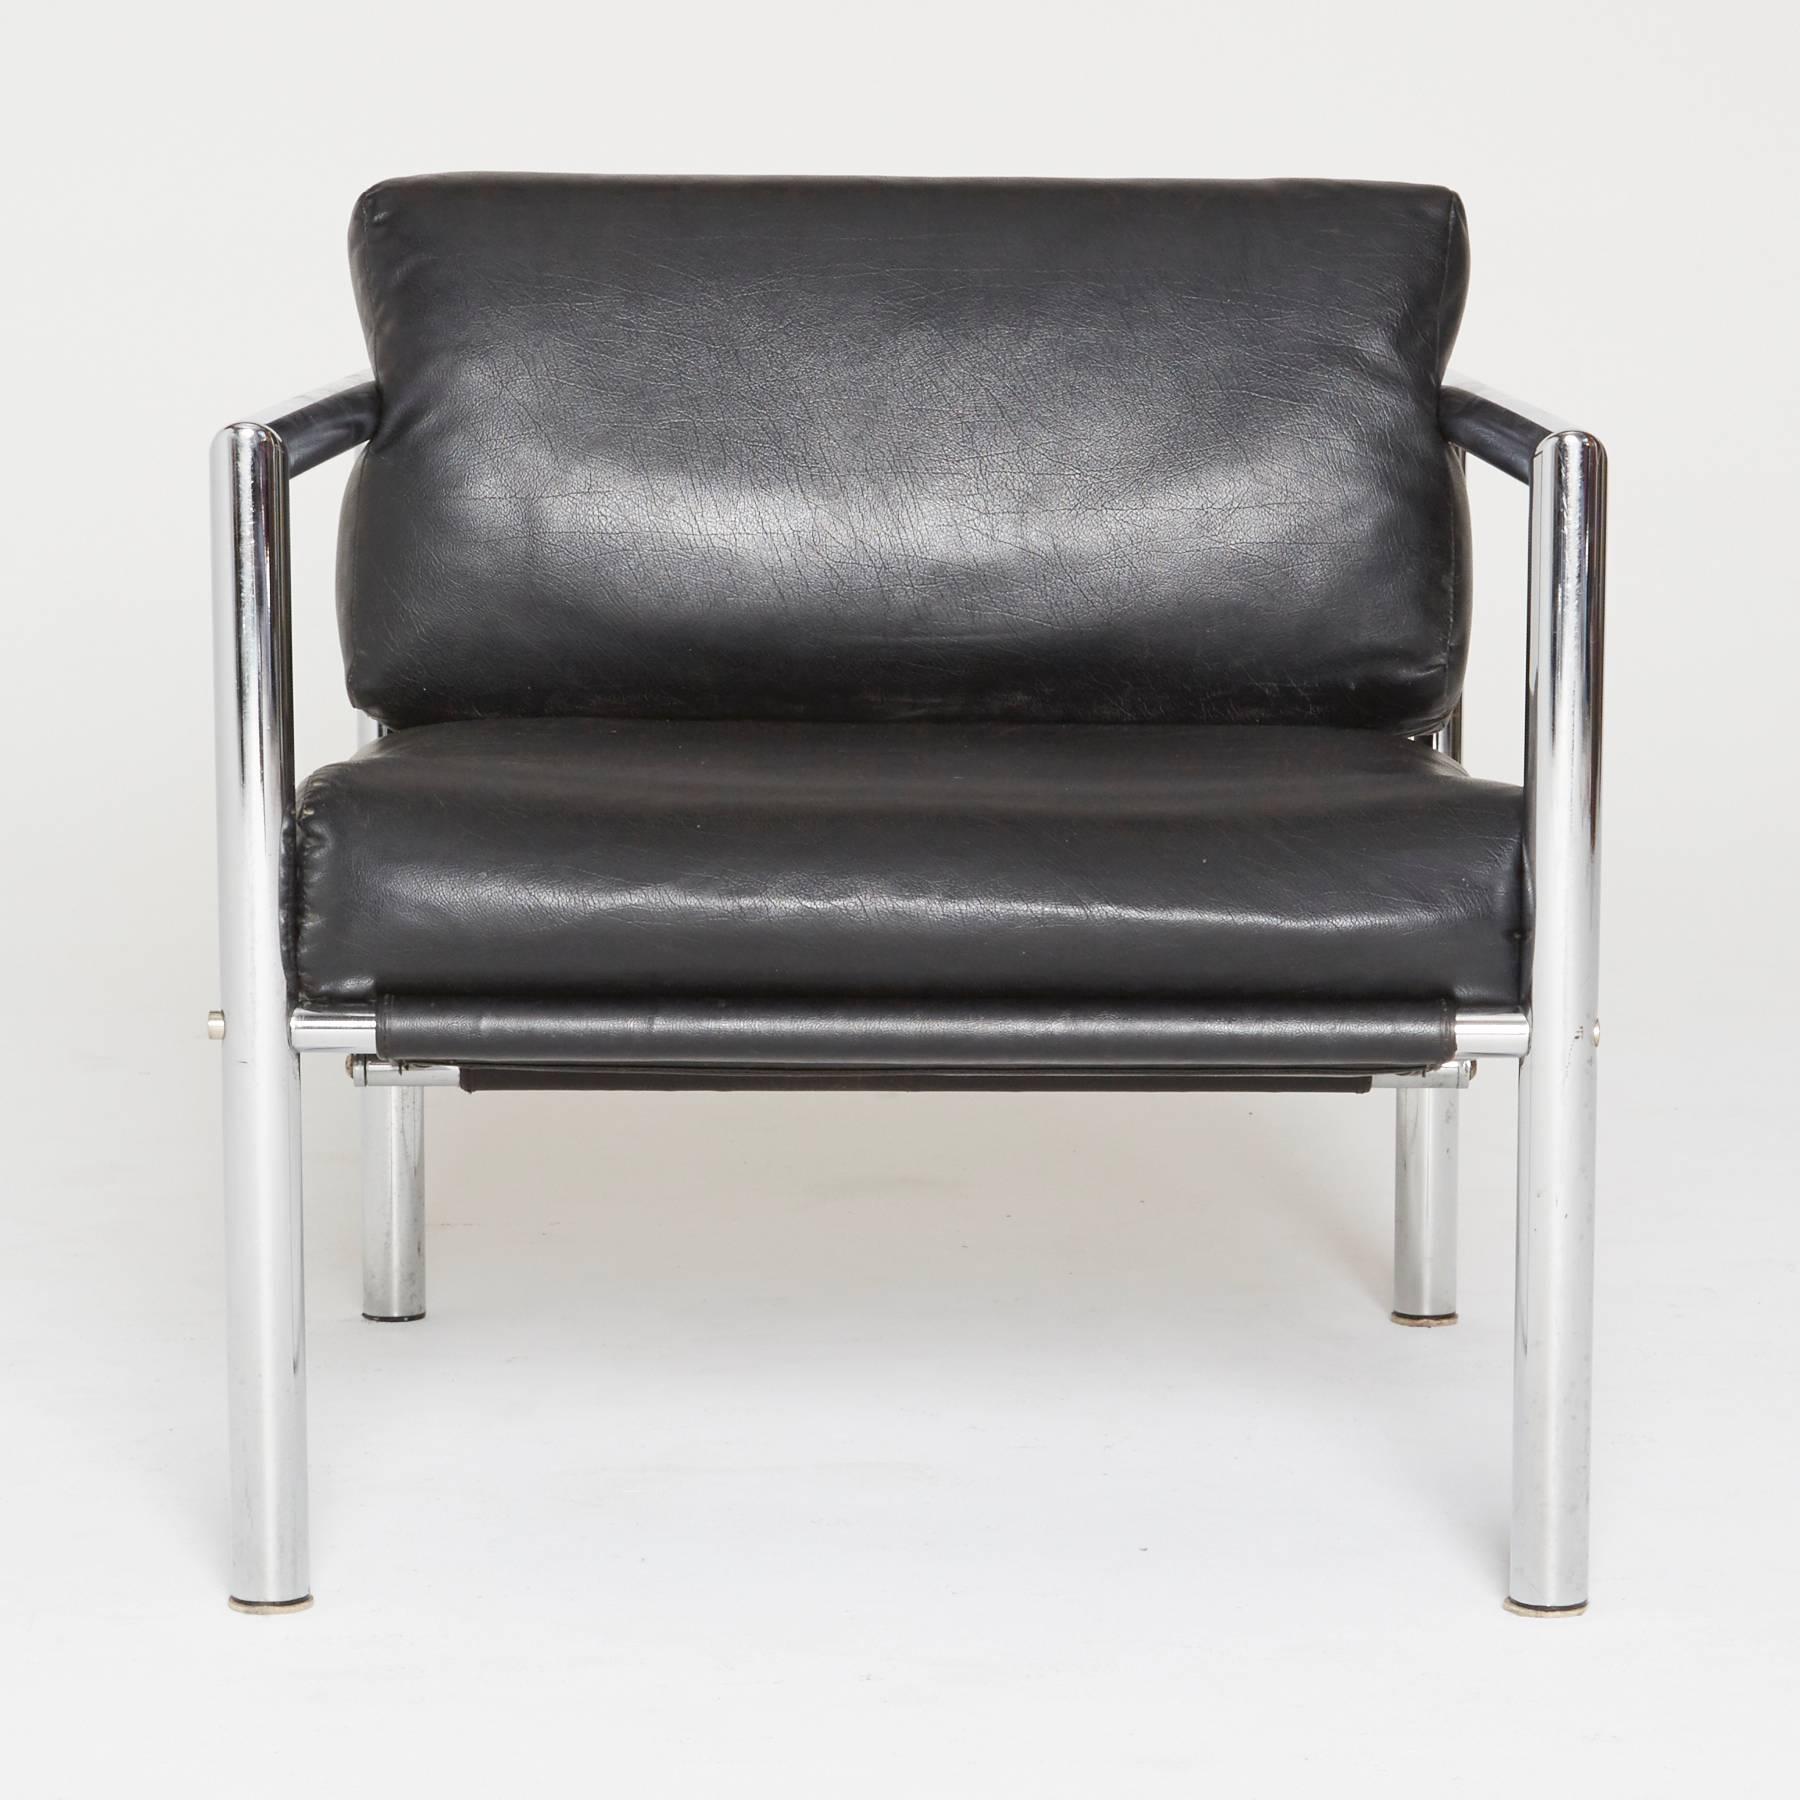 Sleek, attractive and cool. Tubular chrome frames create the squared armrests, with black cushions resting in the sling supports similar to styles of Martin Visser and Roger Sprunger for Dunbar. The perfect lounge for a stylish living room, dapper